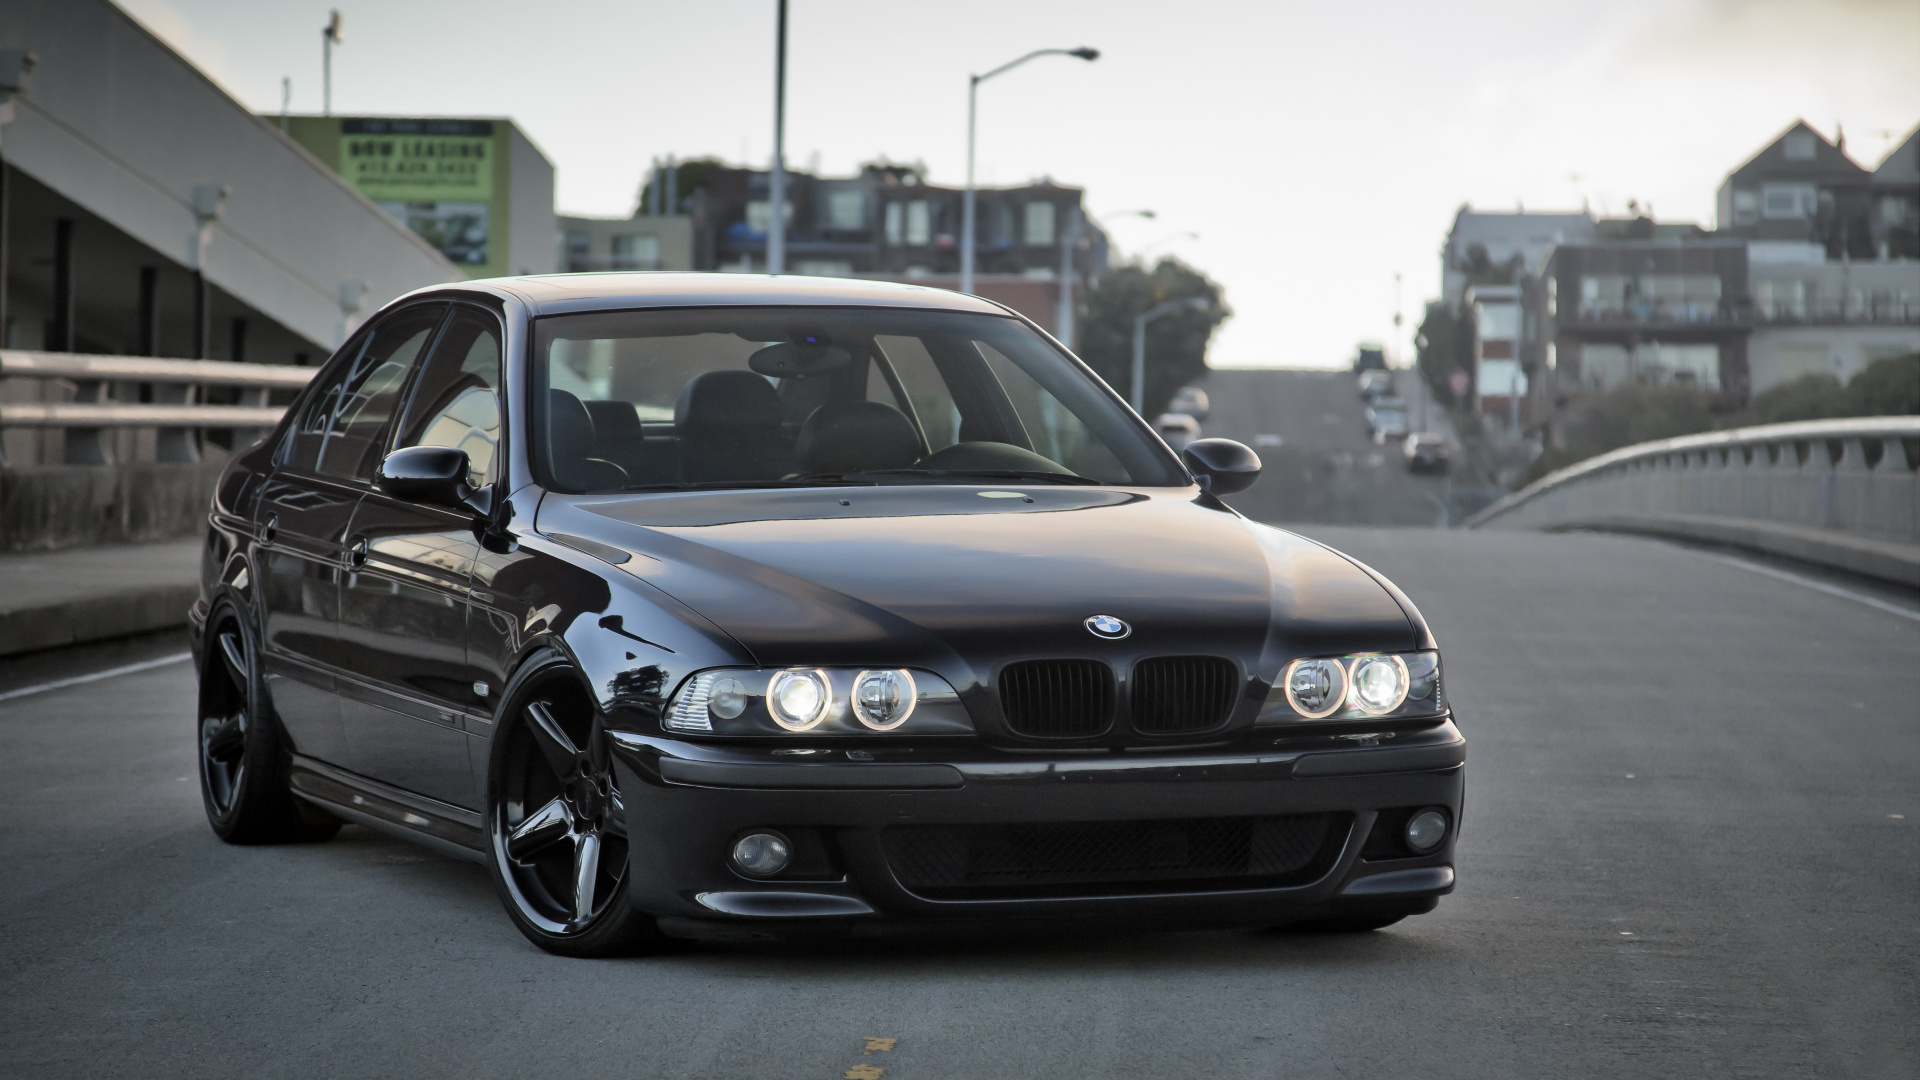 Black Bmw m 3 on Road During Daytime. Wallpaper in 1920x1080 Resolution